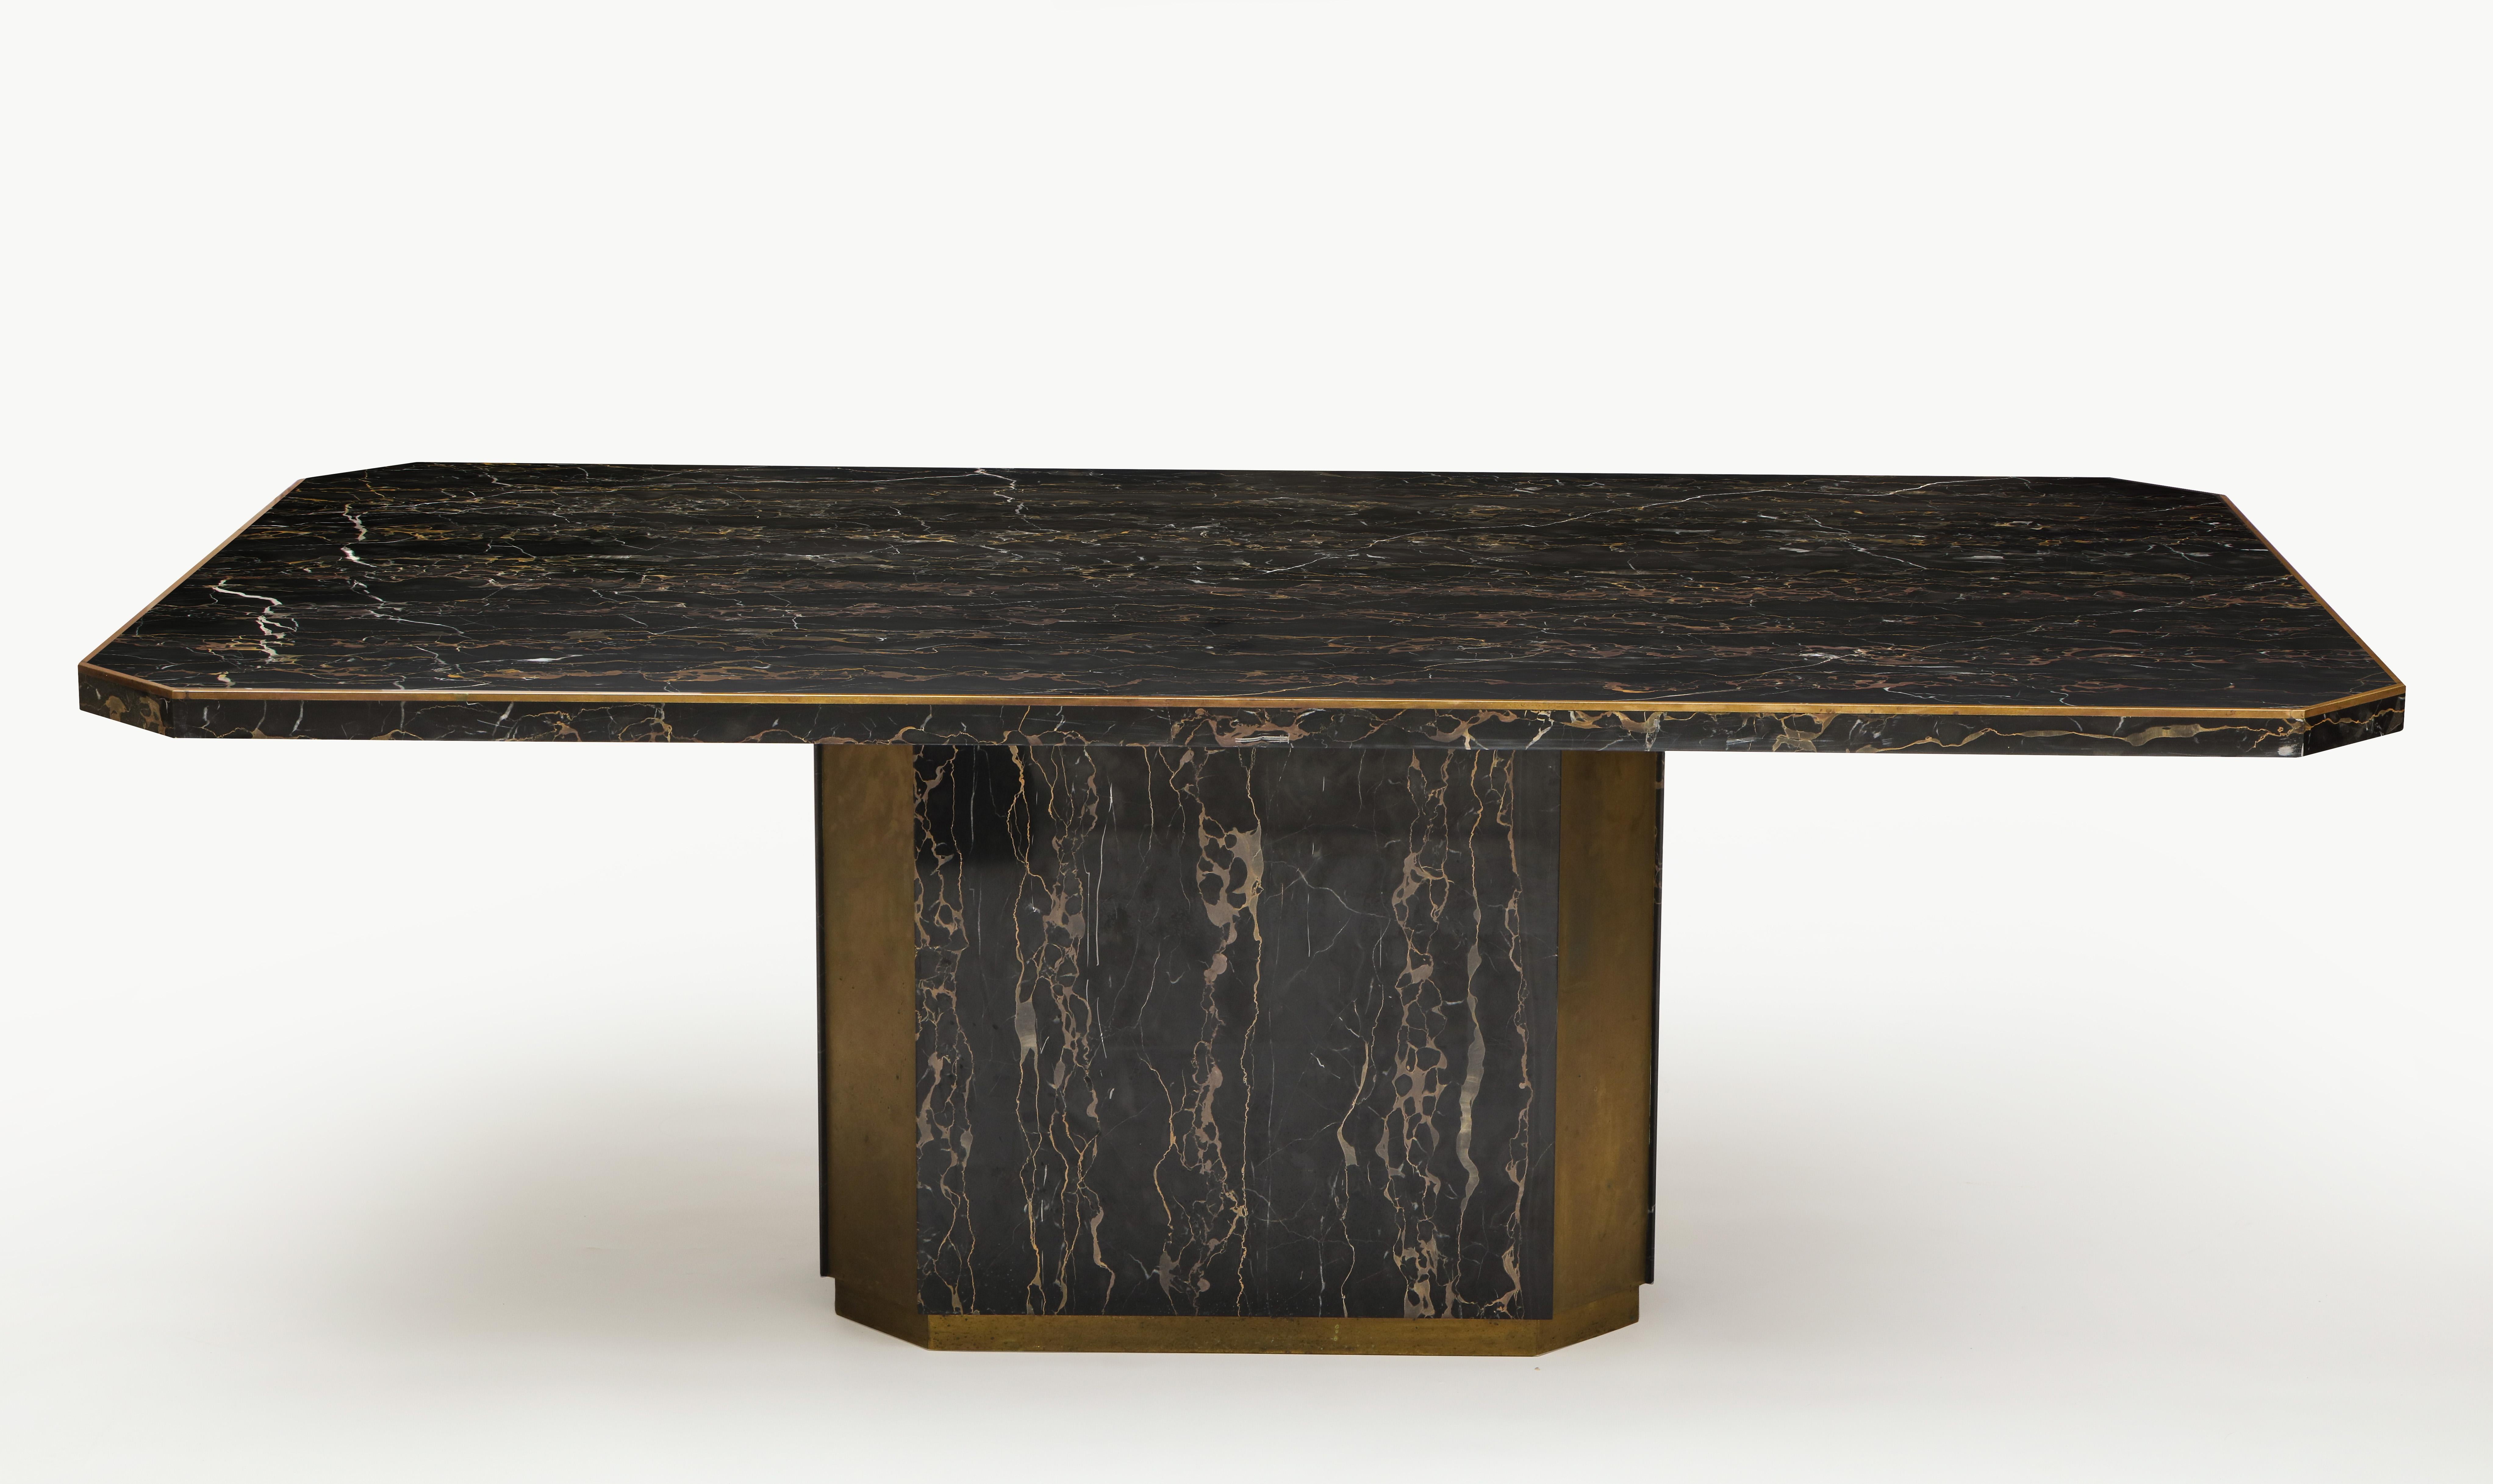 Paco Rabanne black Portoro marble dining table bronze detail, France, 1980

Incredible Portoro French marble table. It is signed Paco Rabanne 1982 on the top base area. The bronze detail is incredible. The table comes in two pieces the top and the